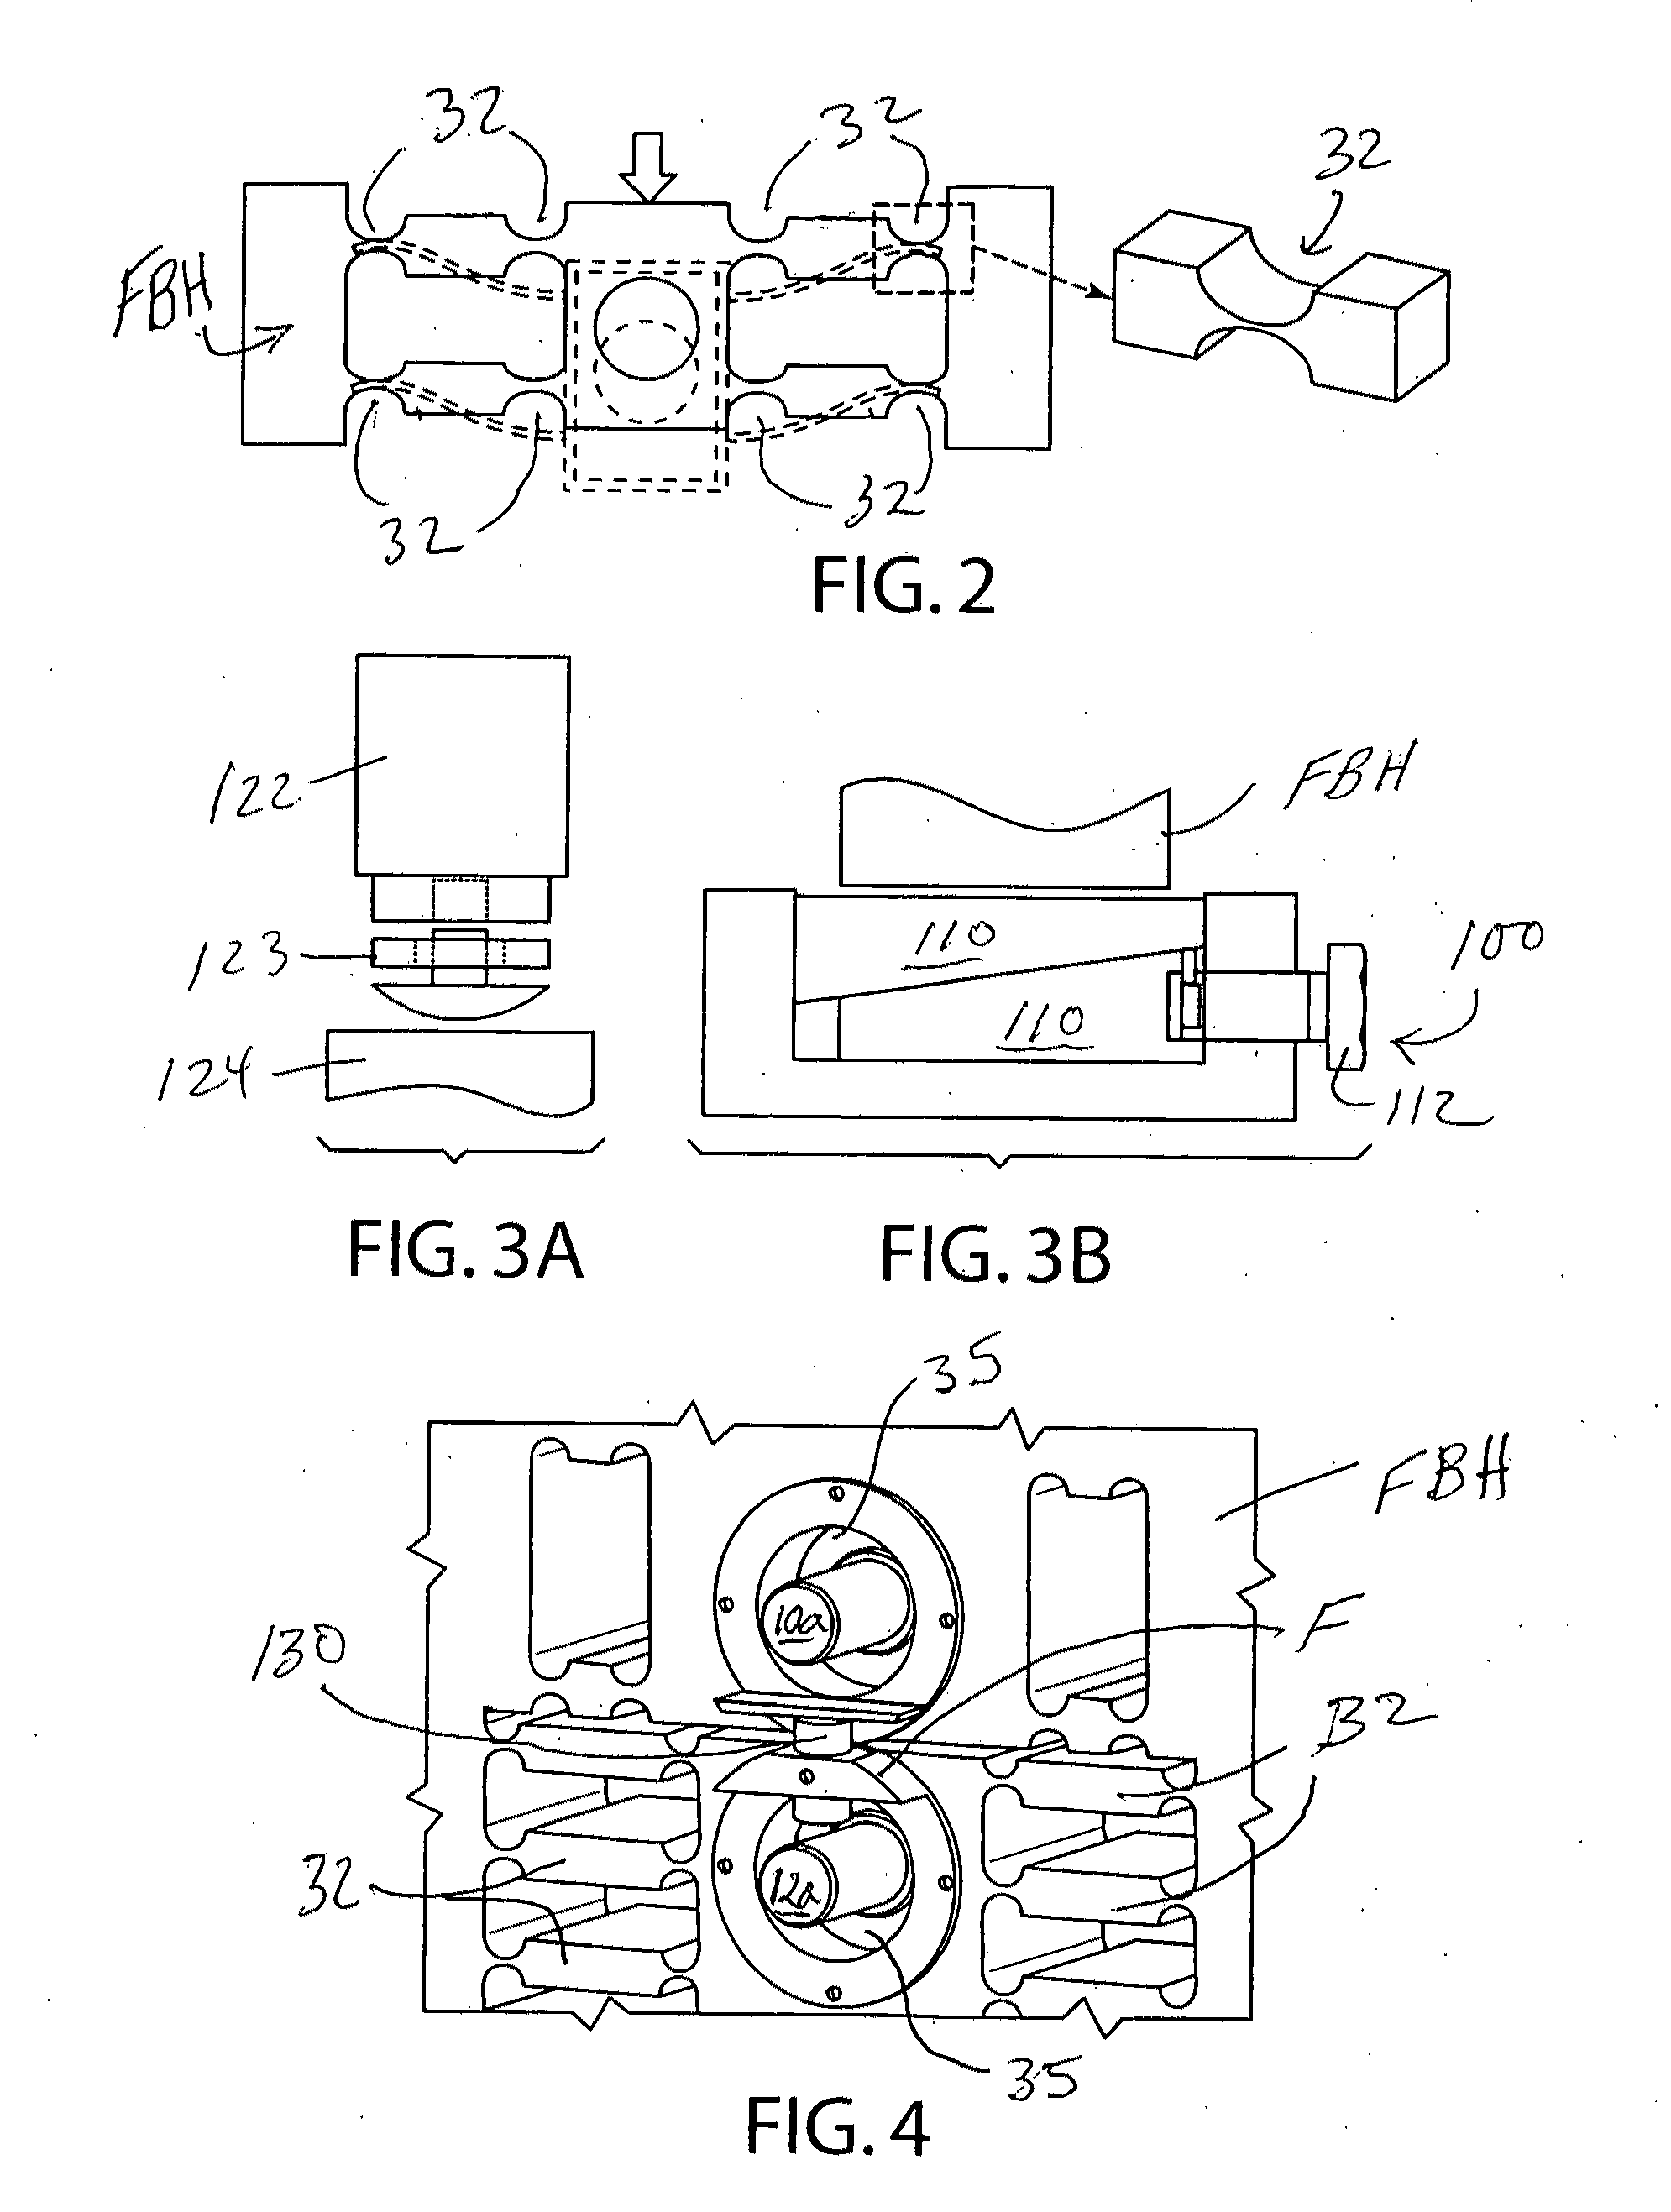 Deformation-based micro surface texturing system